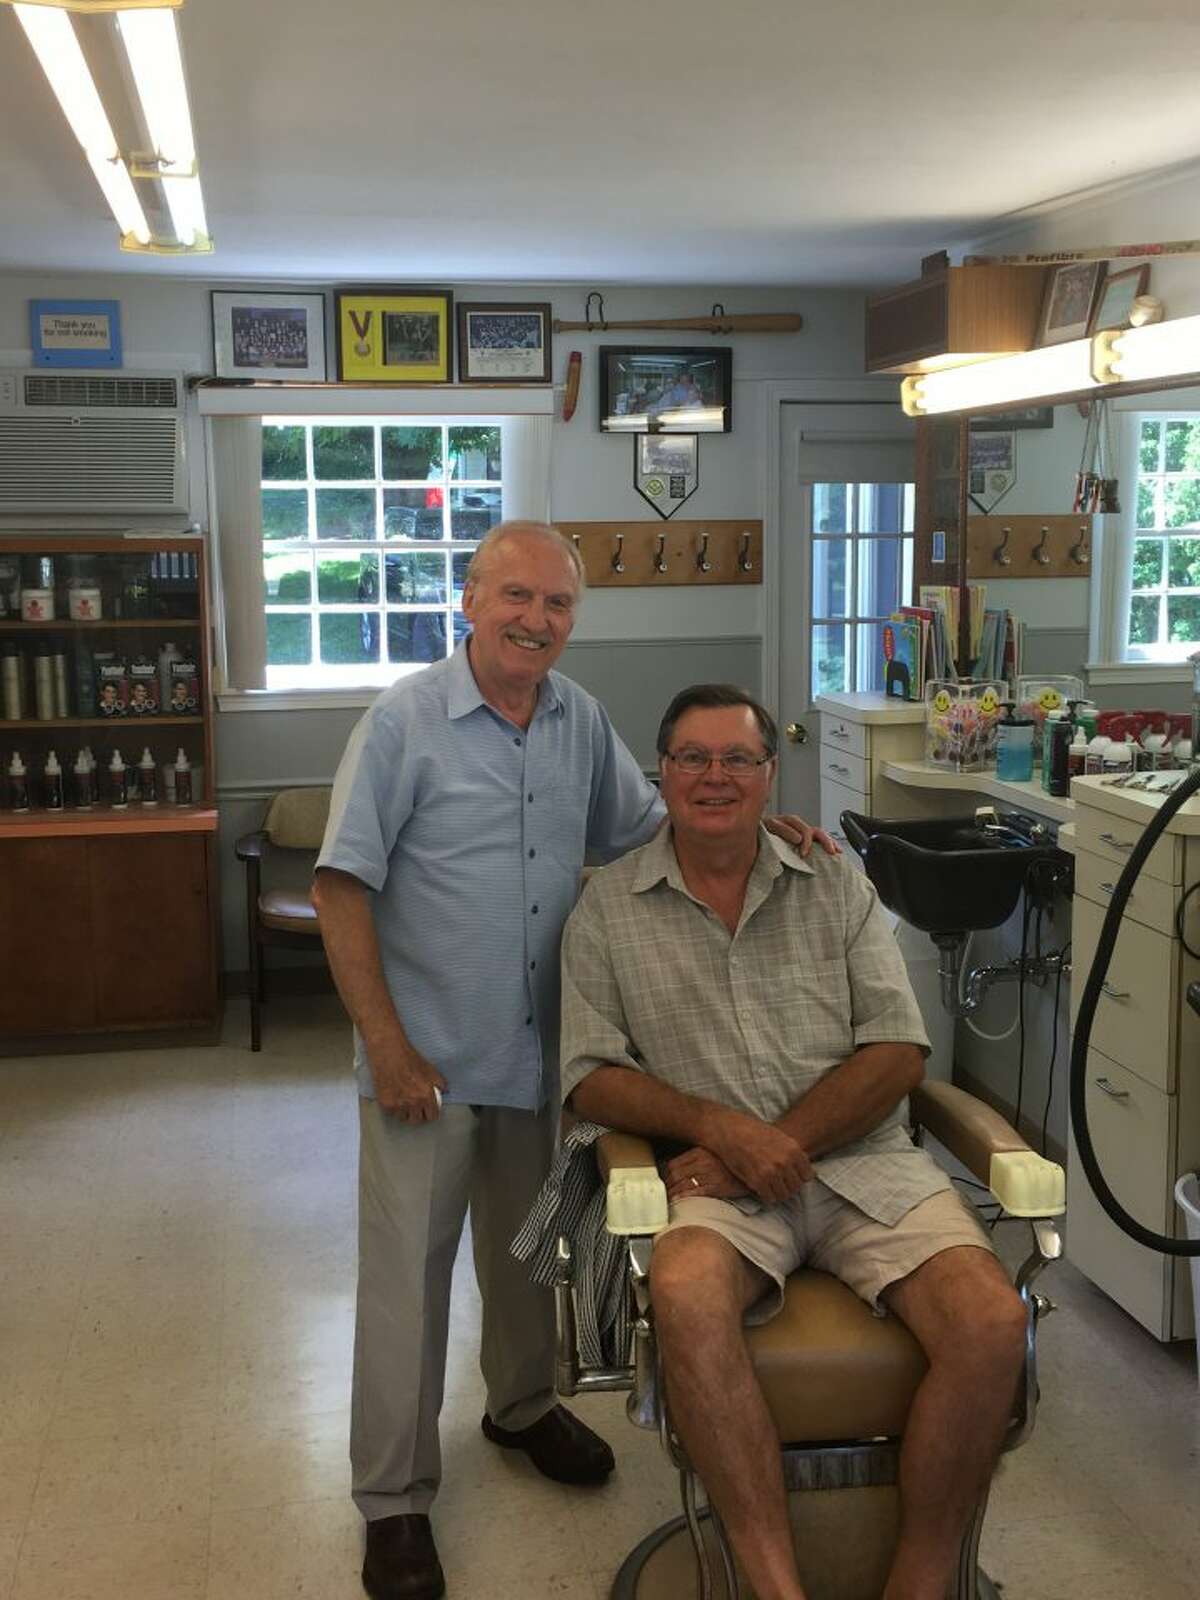 Nick Clericuzio, owner of Long Hill Hair Stylists, smiles with long-time customer Vincent Zujewski after completing a haircut on June 27. Zujewski, a member of Trumbull High School’s Class of 1968, has been going to Clericuzio’s barbershop since he was 16 years old. His most recent cut, which he will wear to his daughter’s wedding in California this month, marked the 50-year anniversary since his first trim at Long Hill Hairstylists in 1966. — Steve Coulter photo